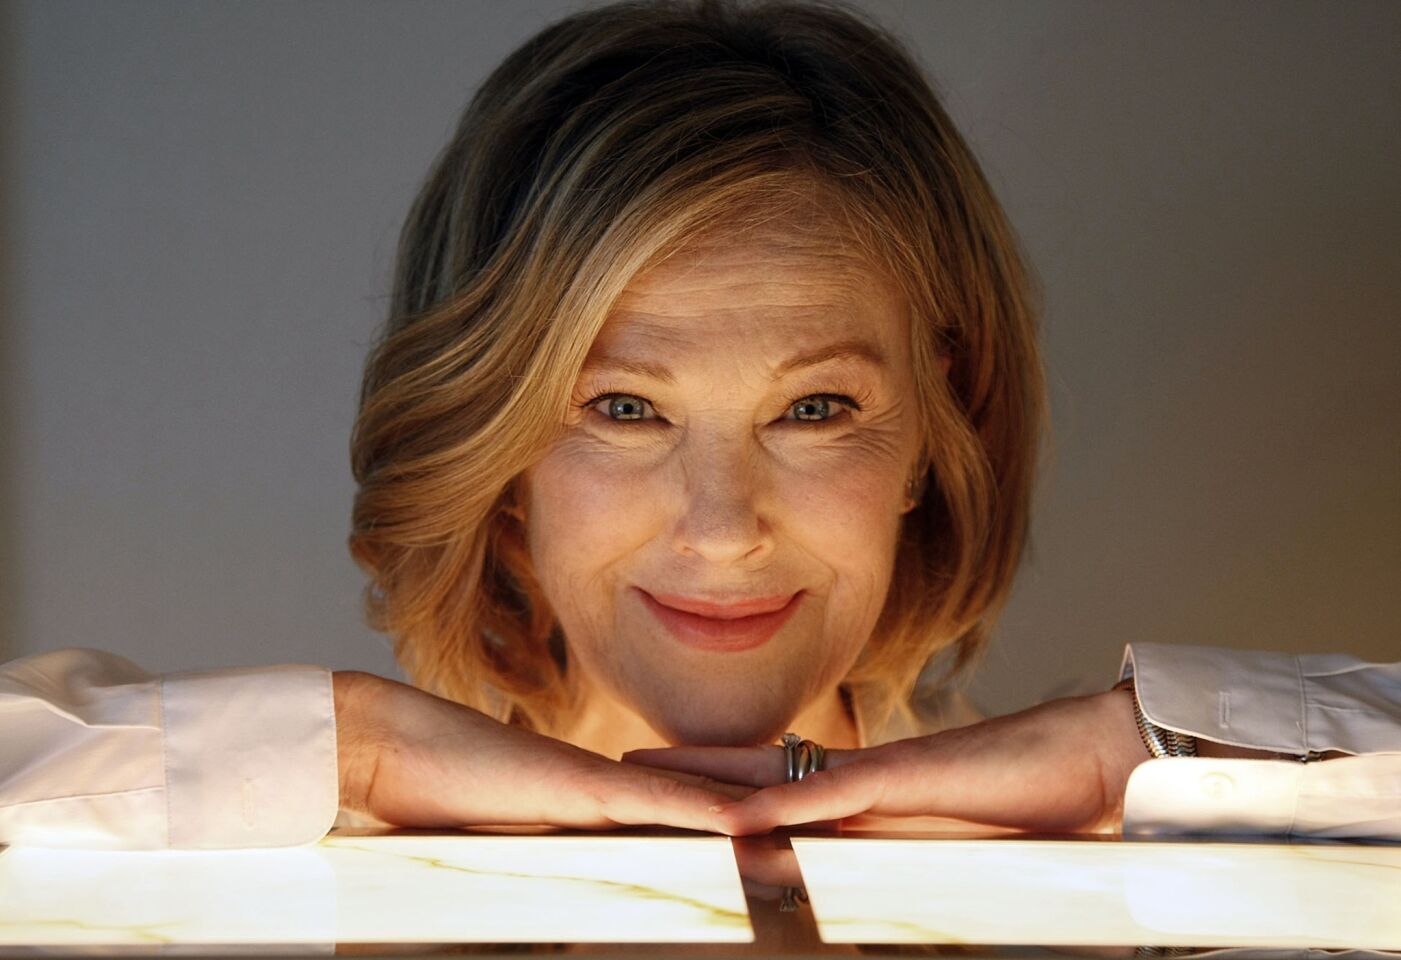 "A.C.O.D." actress Catherine O'Hara, also known for "SCTV" and Christopher Guest's comedies, credits her parents for her sense of humor.